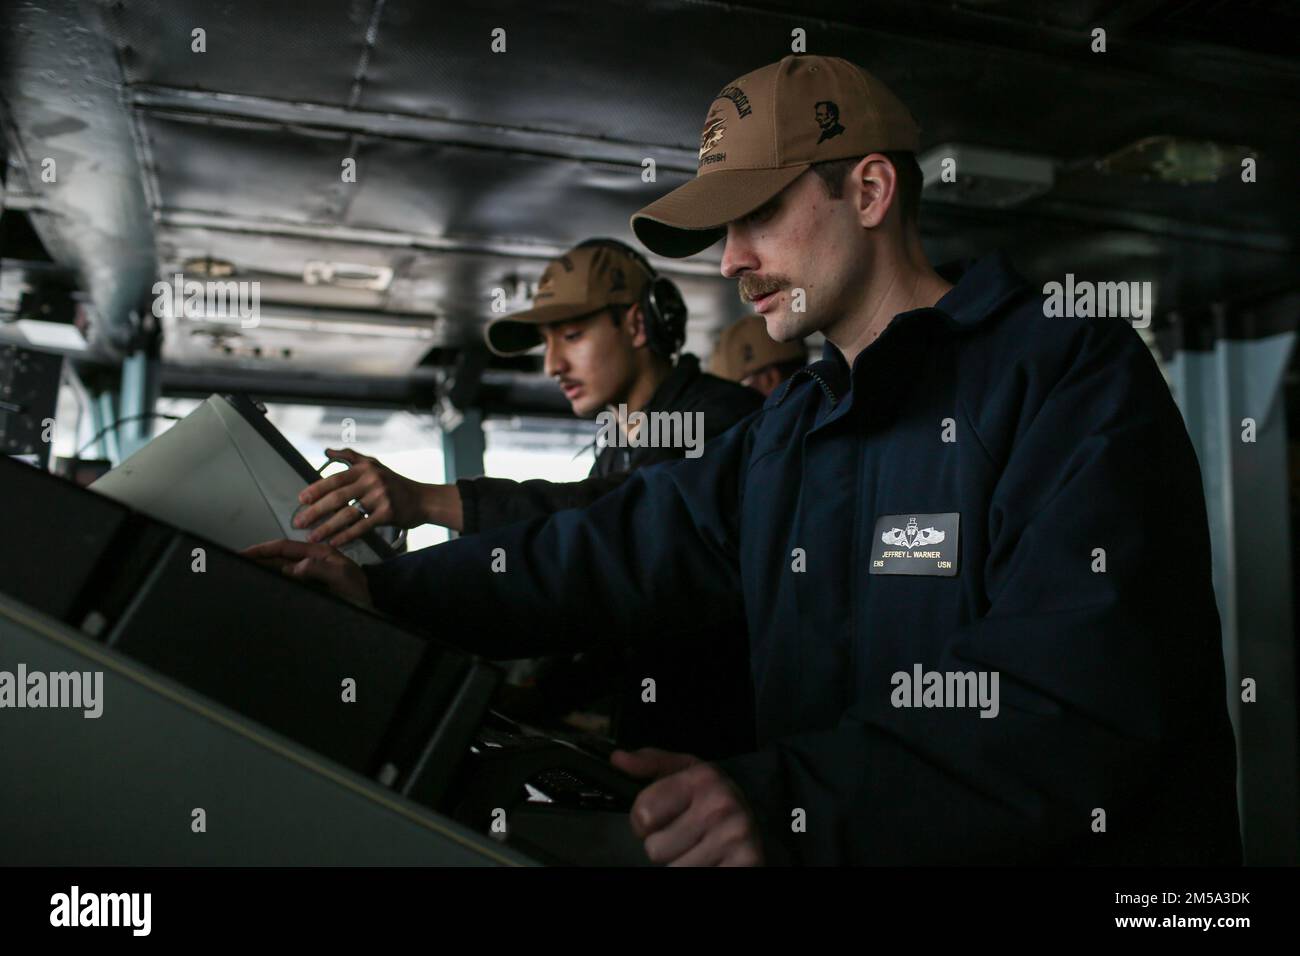 PHILIPPINE SEA (Feb. 14, 2022) Ensign Jeffrey Warner, right, from Coldwater, Mich., monitors a radar for surface or air contacts on the bridge aboard the Nimitz-class aircraft carrier USS Abraham Lincoln (CVN 72). Abraham Lincoln Strike Group is on a scheduled deployment in the U.S. 7th Fleet area of operations to enhance interoperability through alliances and partnerships while serving as a ready-response force in support of a free and open Indo-Pacific region. Stock Photo